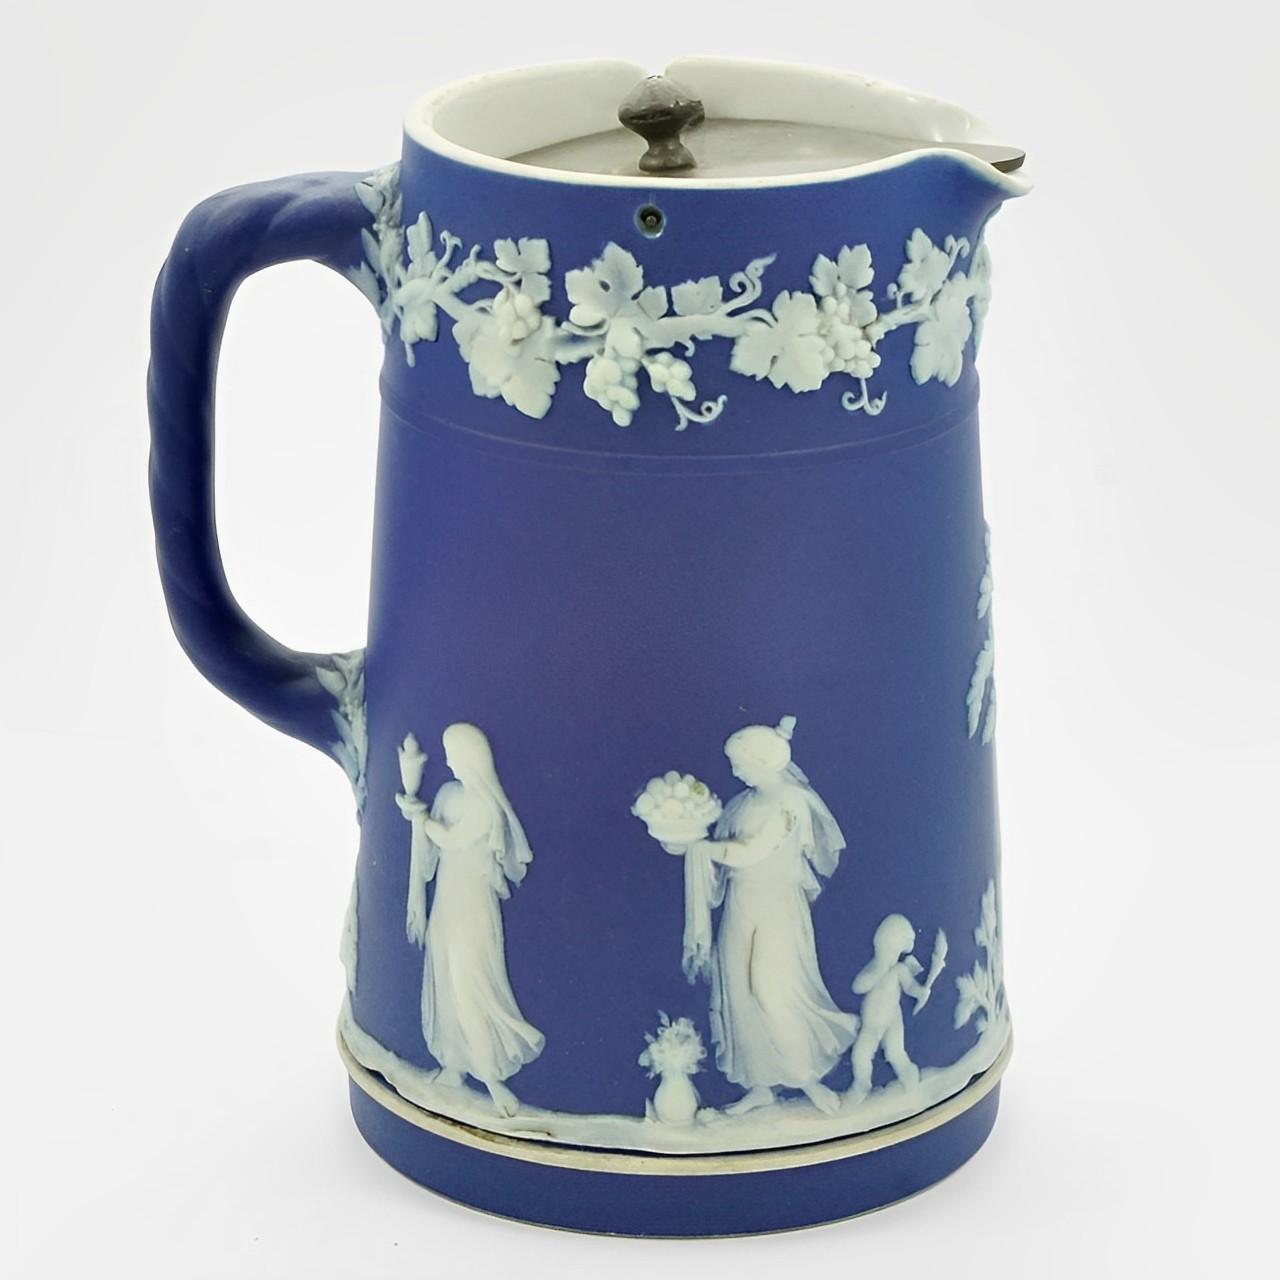 Beautiful Wedgwood antique Victorian dark cobalt blue jasperware Upright jug with a pewter lid. Featuring classical relief figures and a grapevine edging, and the handle has a rope twist design. Measuring height 11.7 cm / 4.5 inches, and the base is